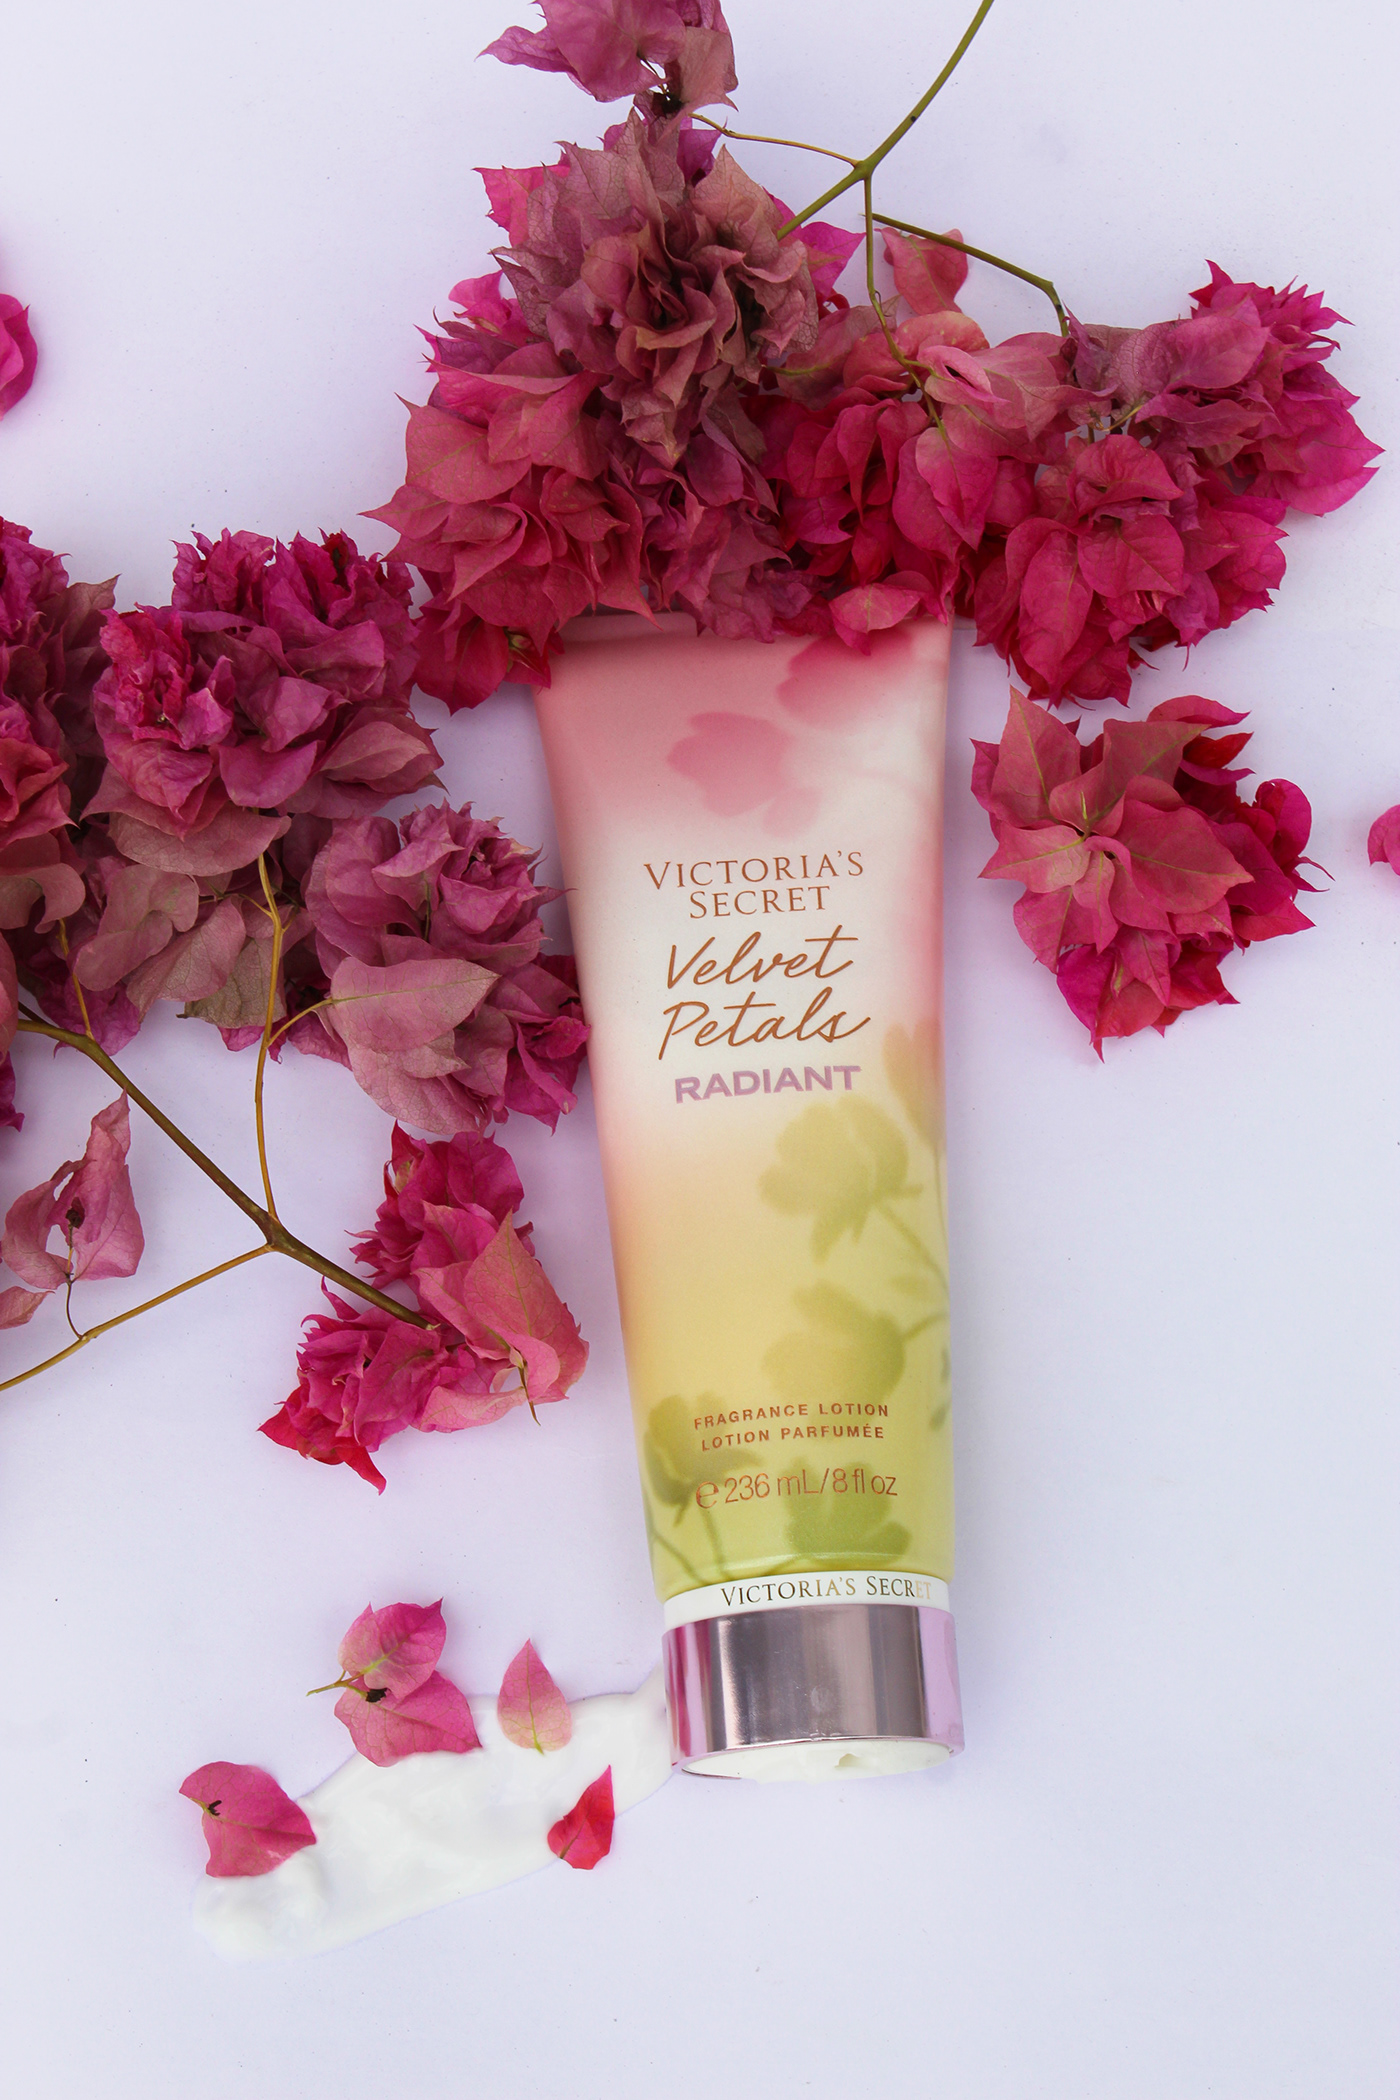 advertisement advertismentphotography bodylotion packaging branding ideas lotion packaging phtotography pinkflowers productshot Victoria's Secret victoriassecretpink